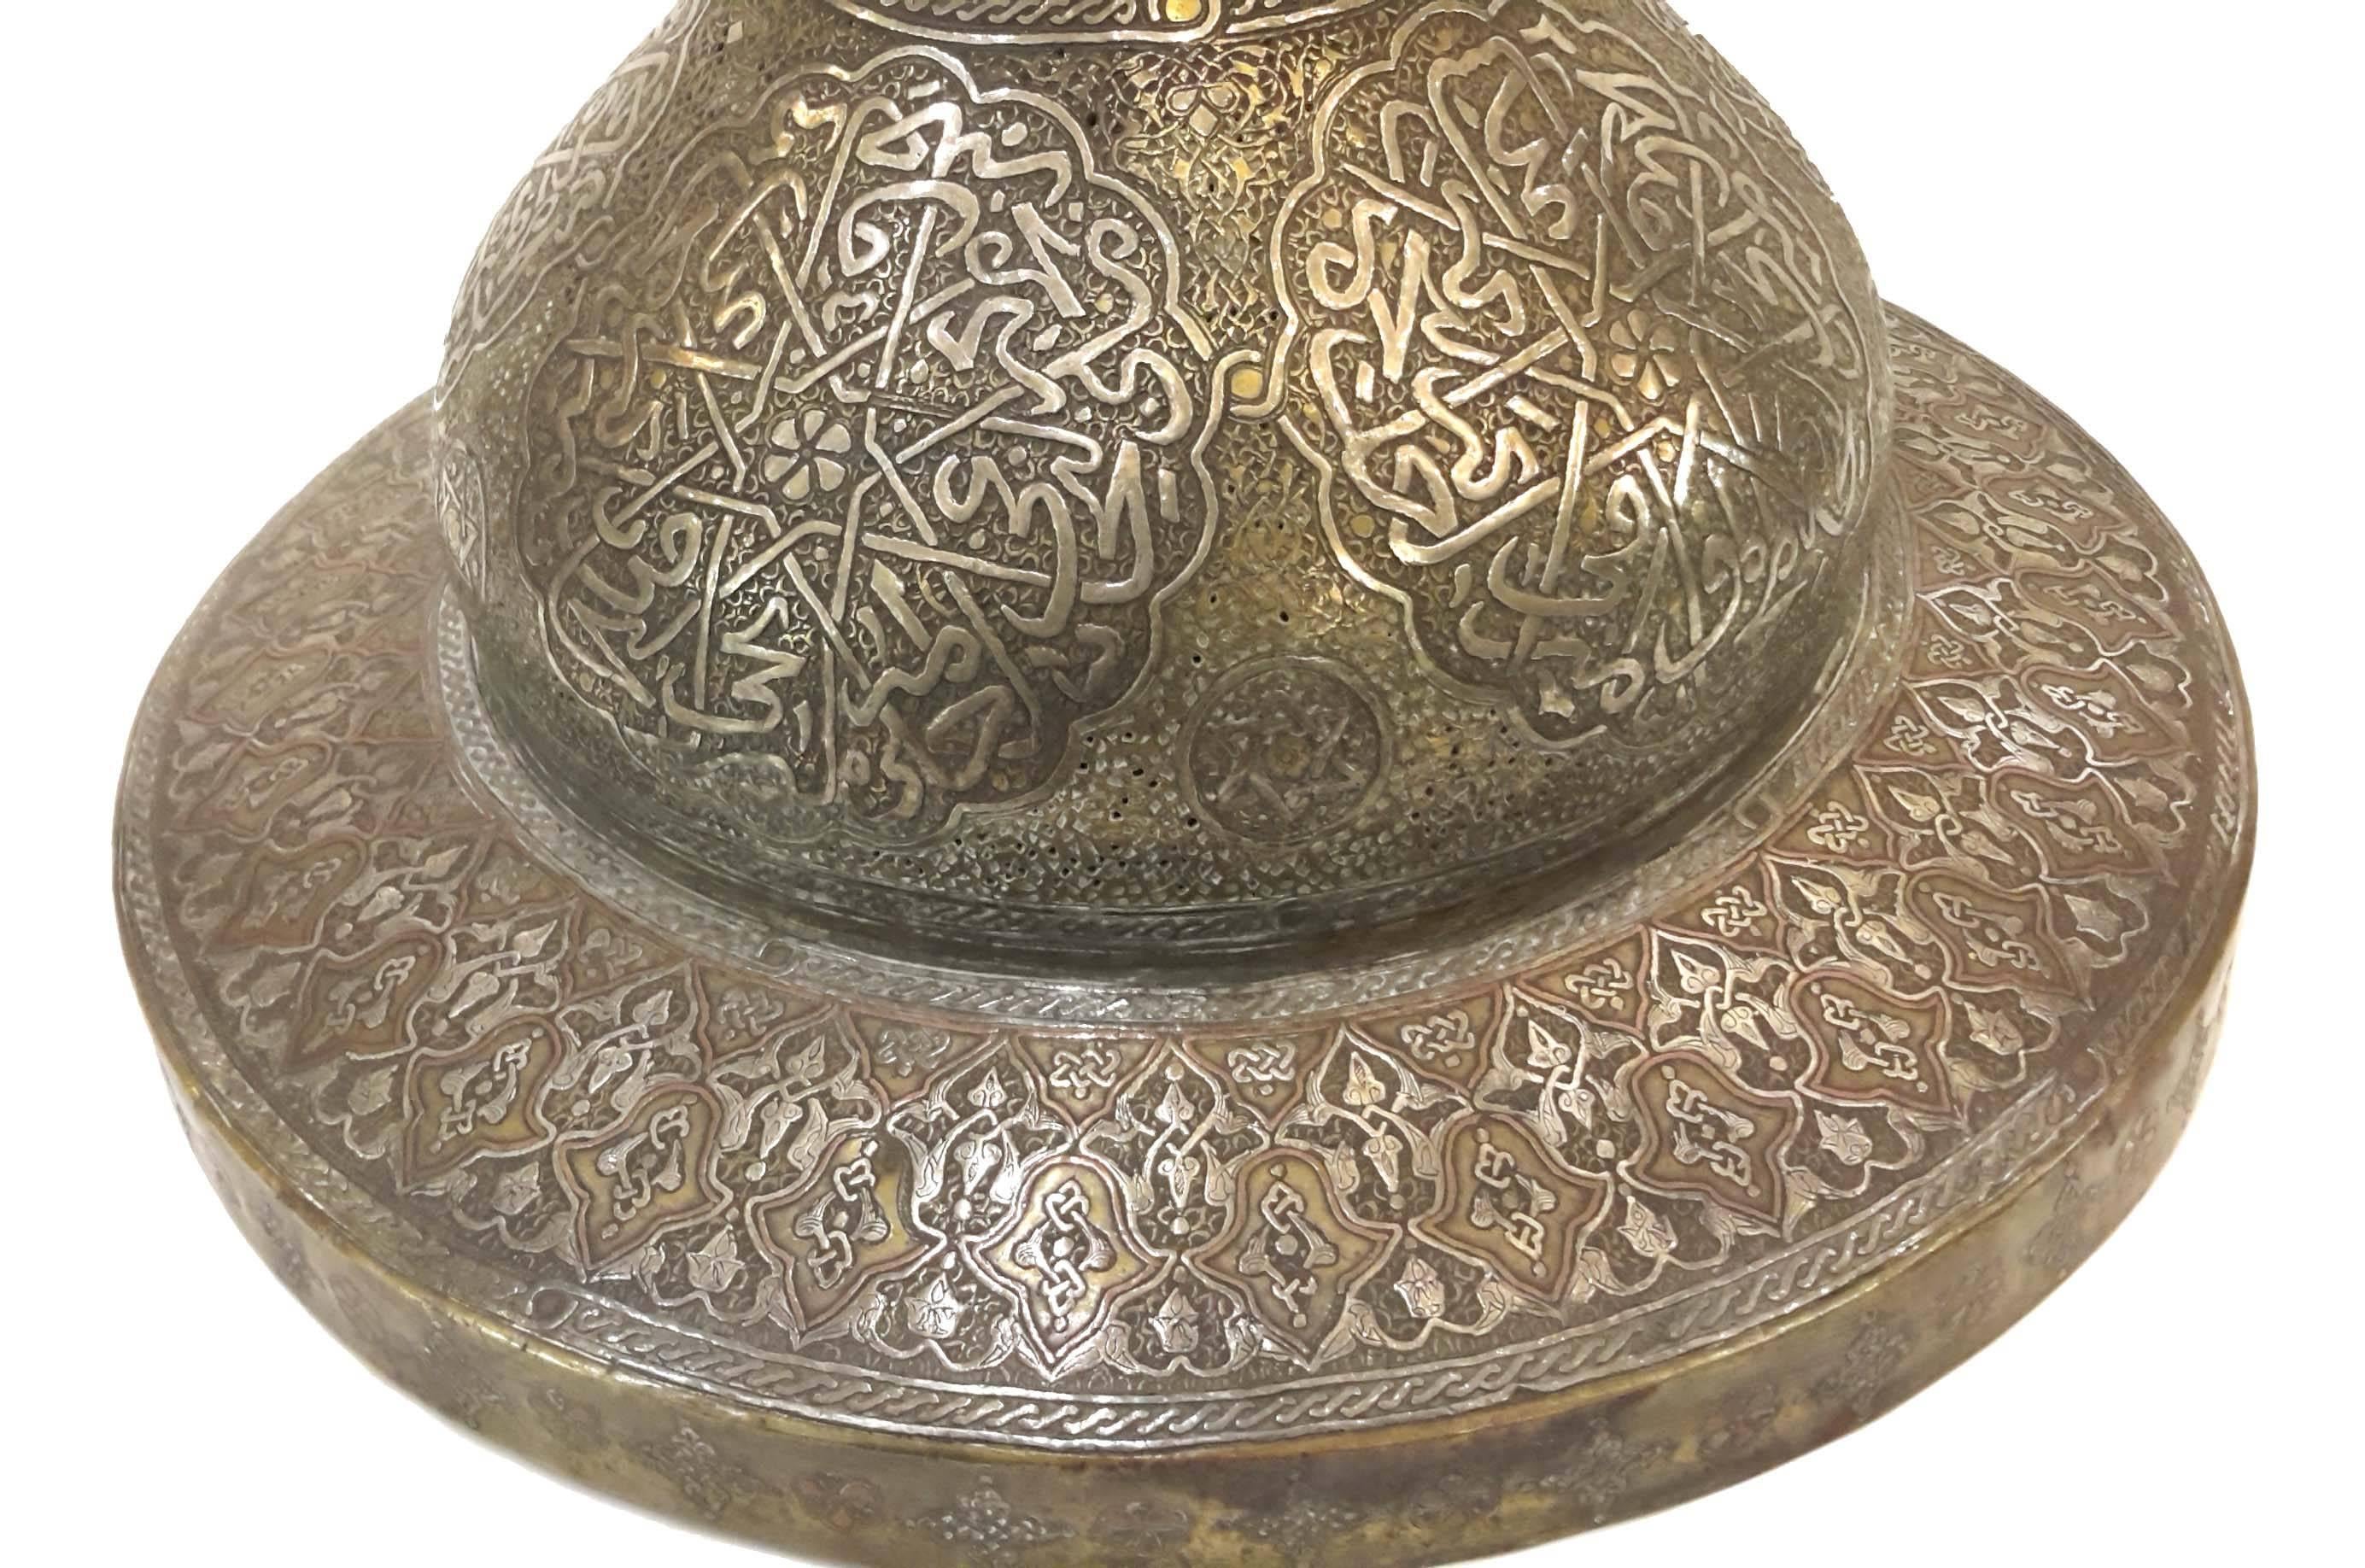 This is one of the best examples of a 19th century Damascene silver and copper inlaid work of art.
Masterfully hand made with the most intricate details. Islamic inscriptions and design motifs in Mamluk style. 

Metalwork is amongst the most